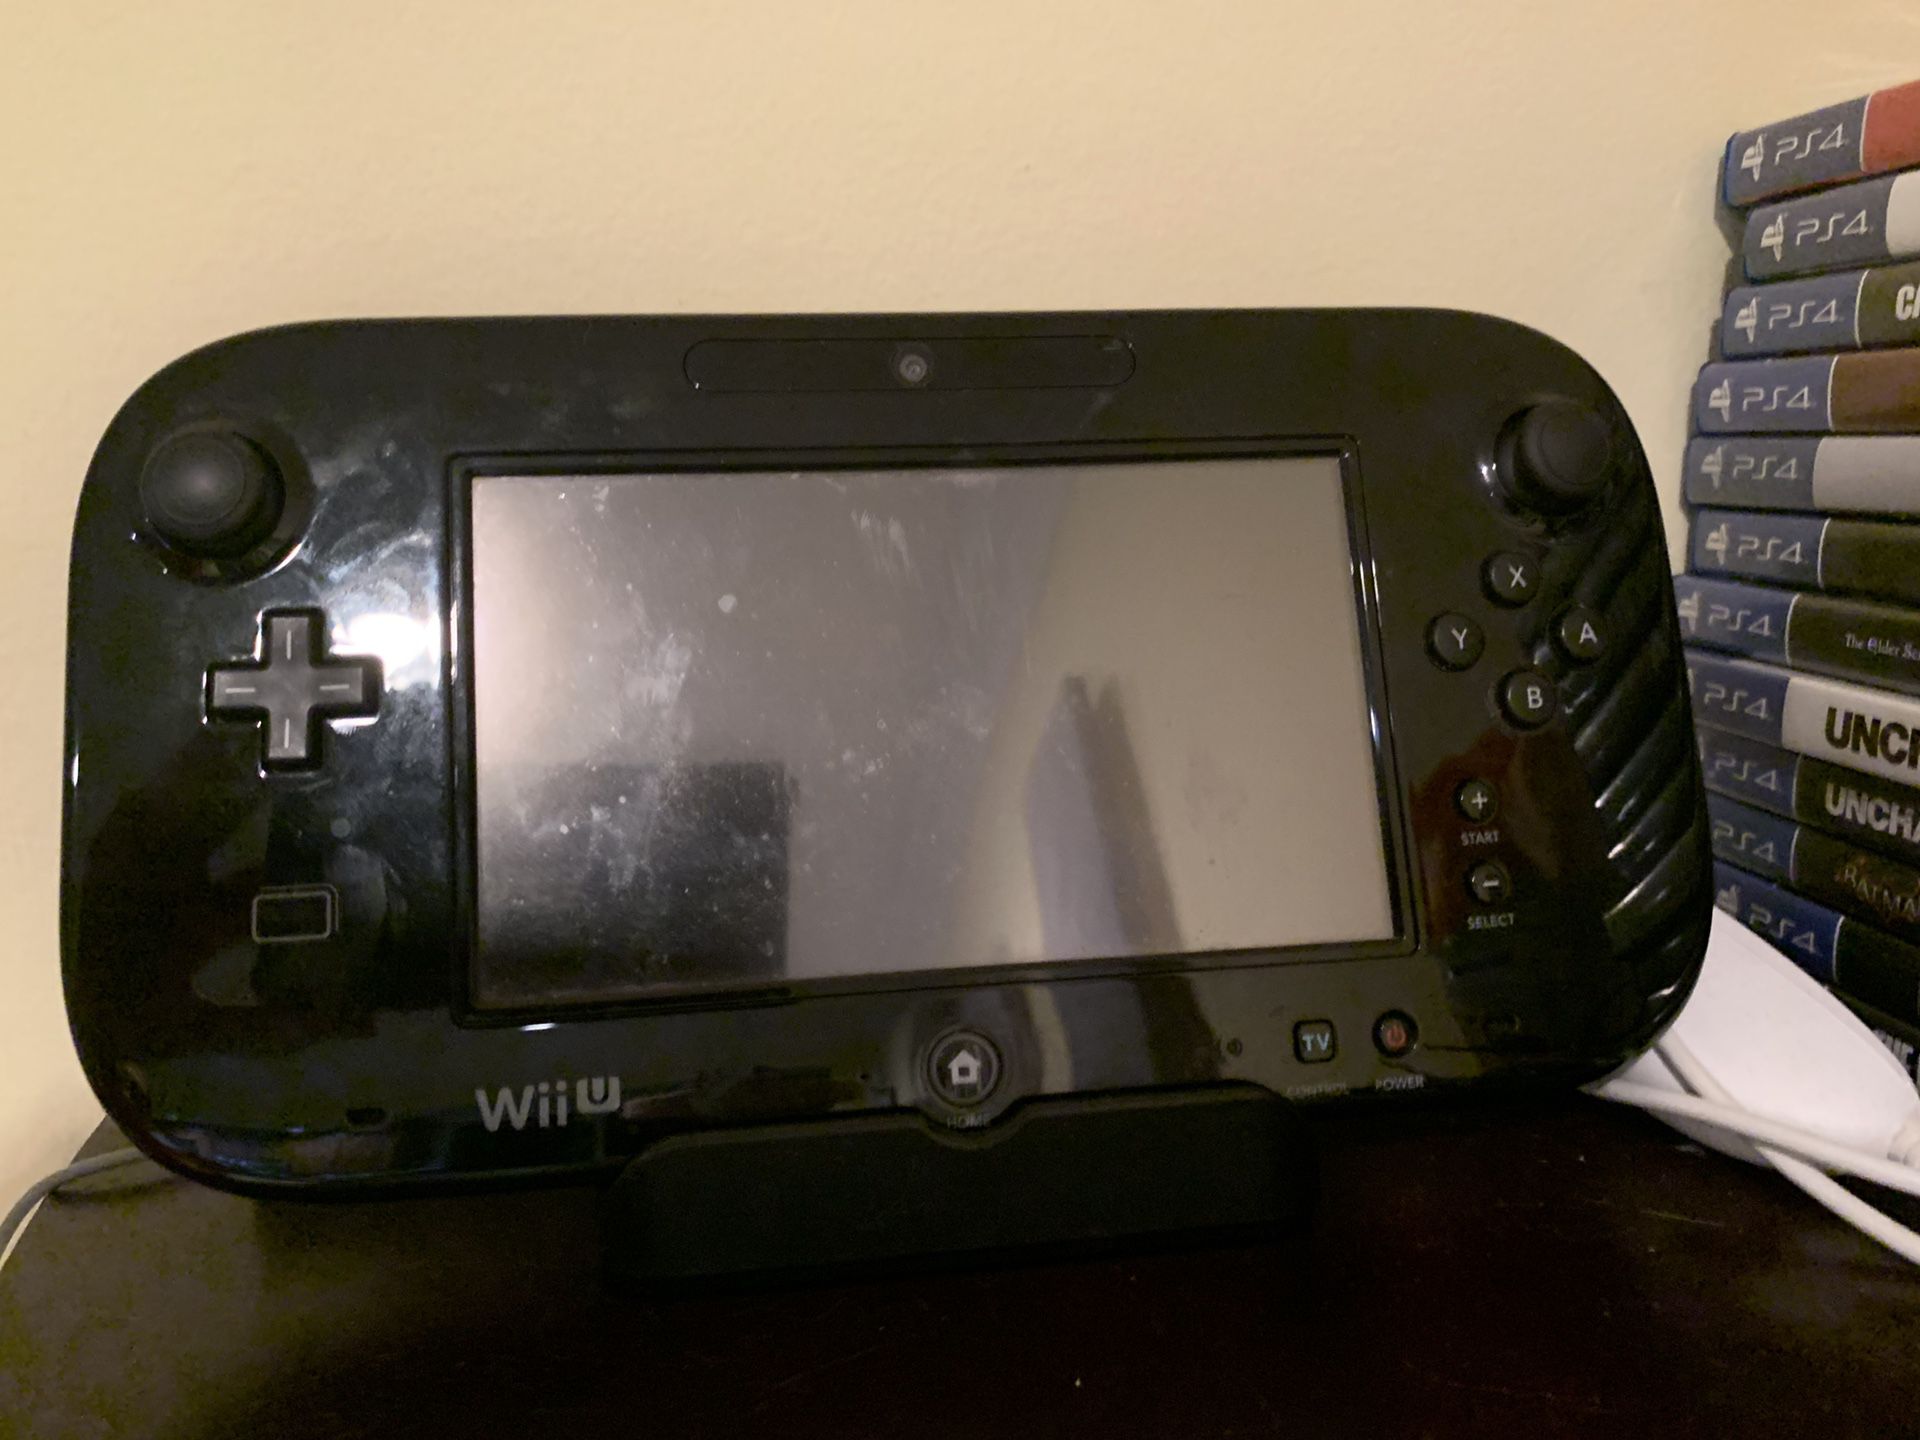 Wii U w/ games and controllers